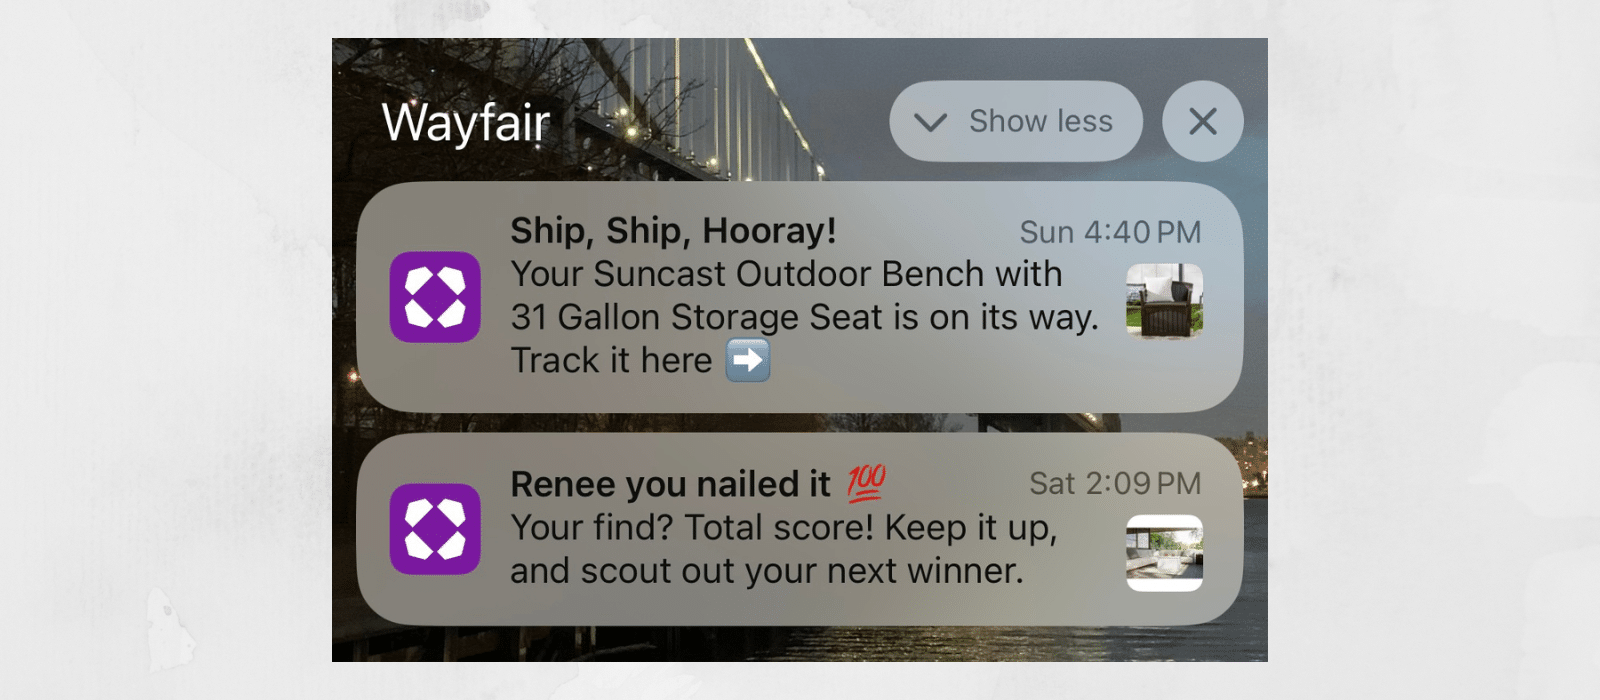 Wayfair uses push notifications to suggested similar products and provide shipping updates.